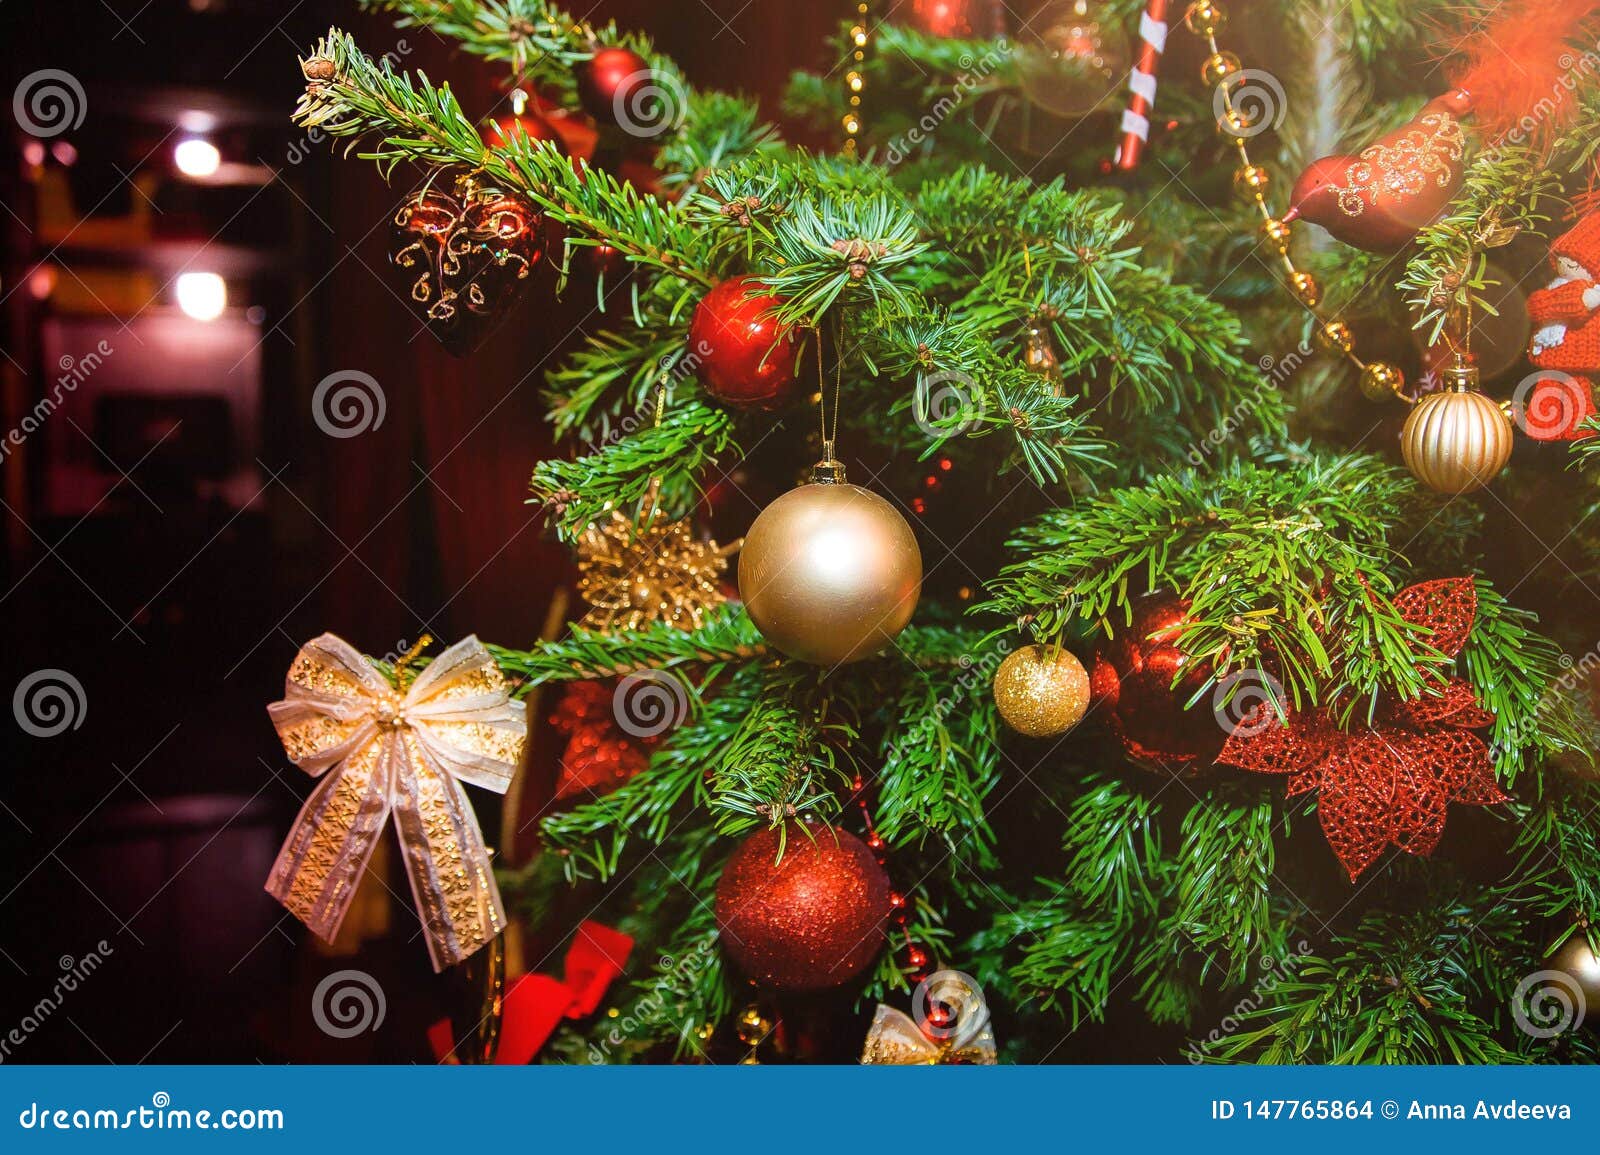 Decorated Christmas Tree in Golden Light Stock Photo - Image of glass ...